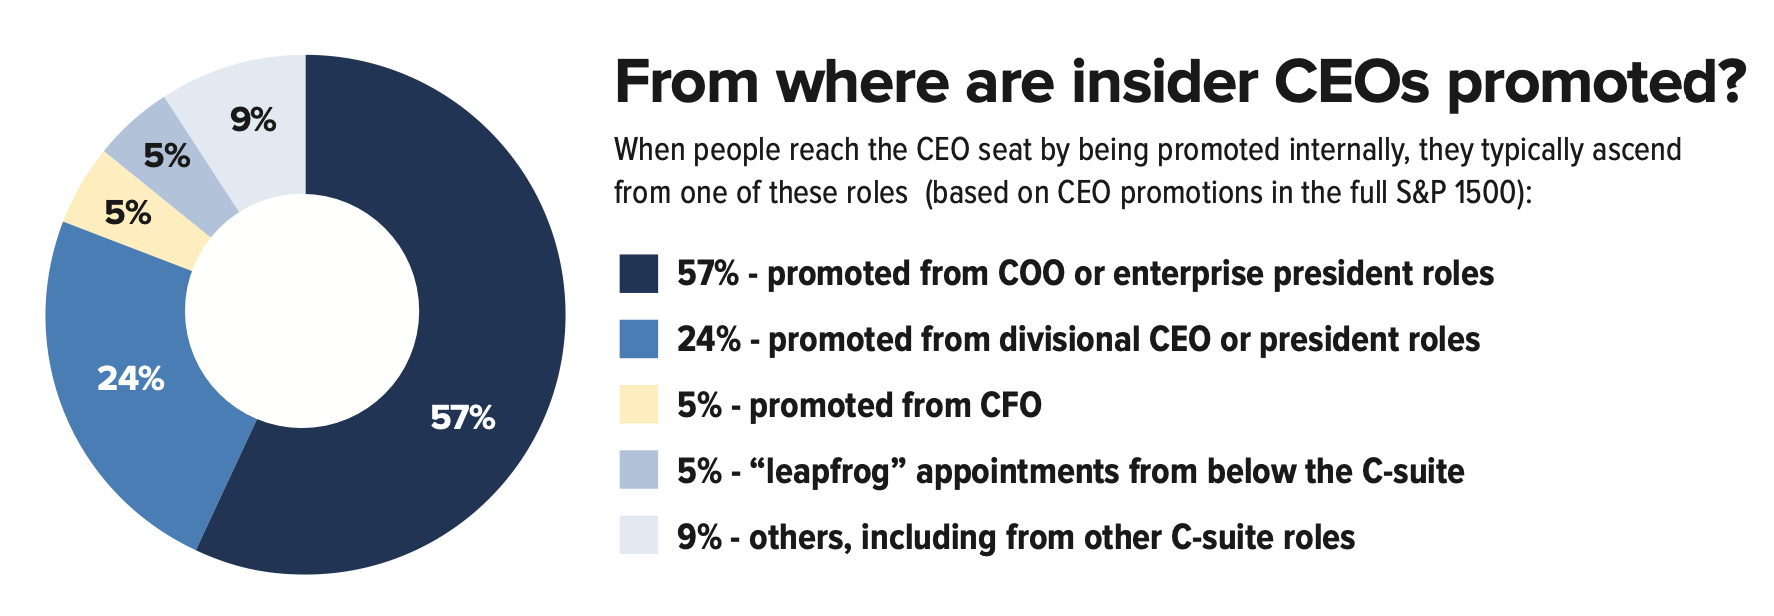 "CEO Comings and Goings: By the Numbers" chart